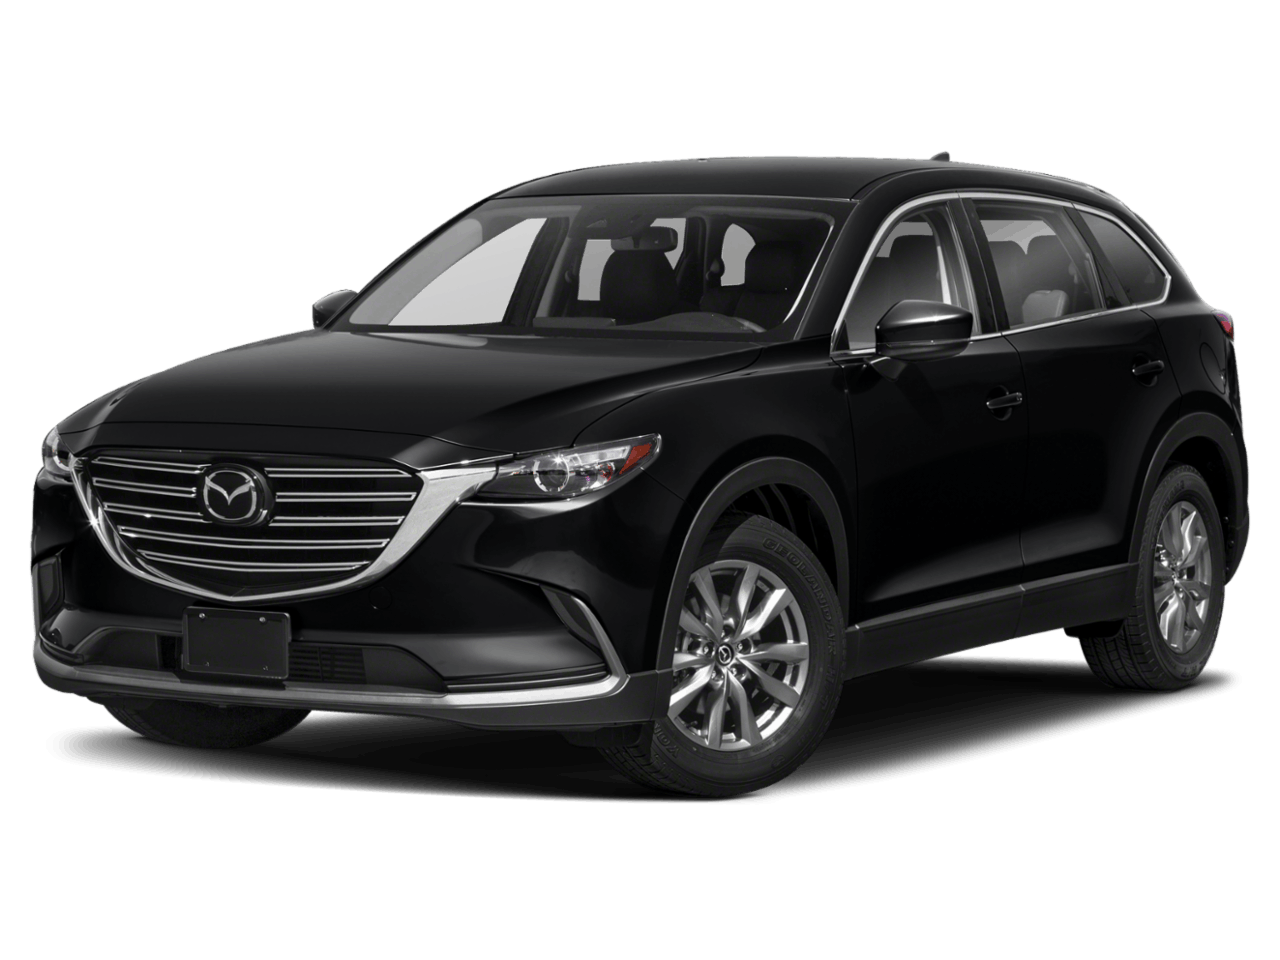 Used Cx-9 Models in Prince Frederick, MD